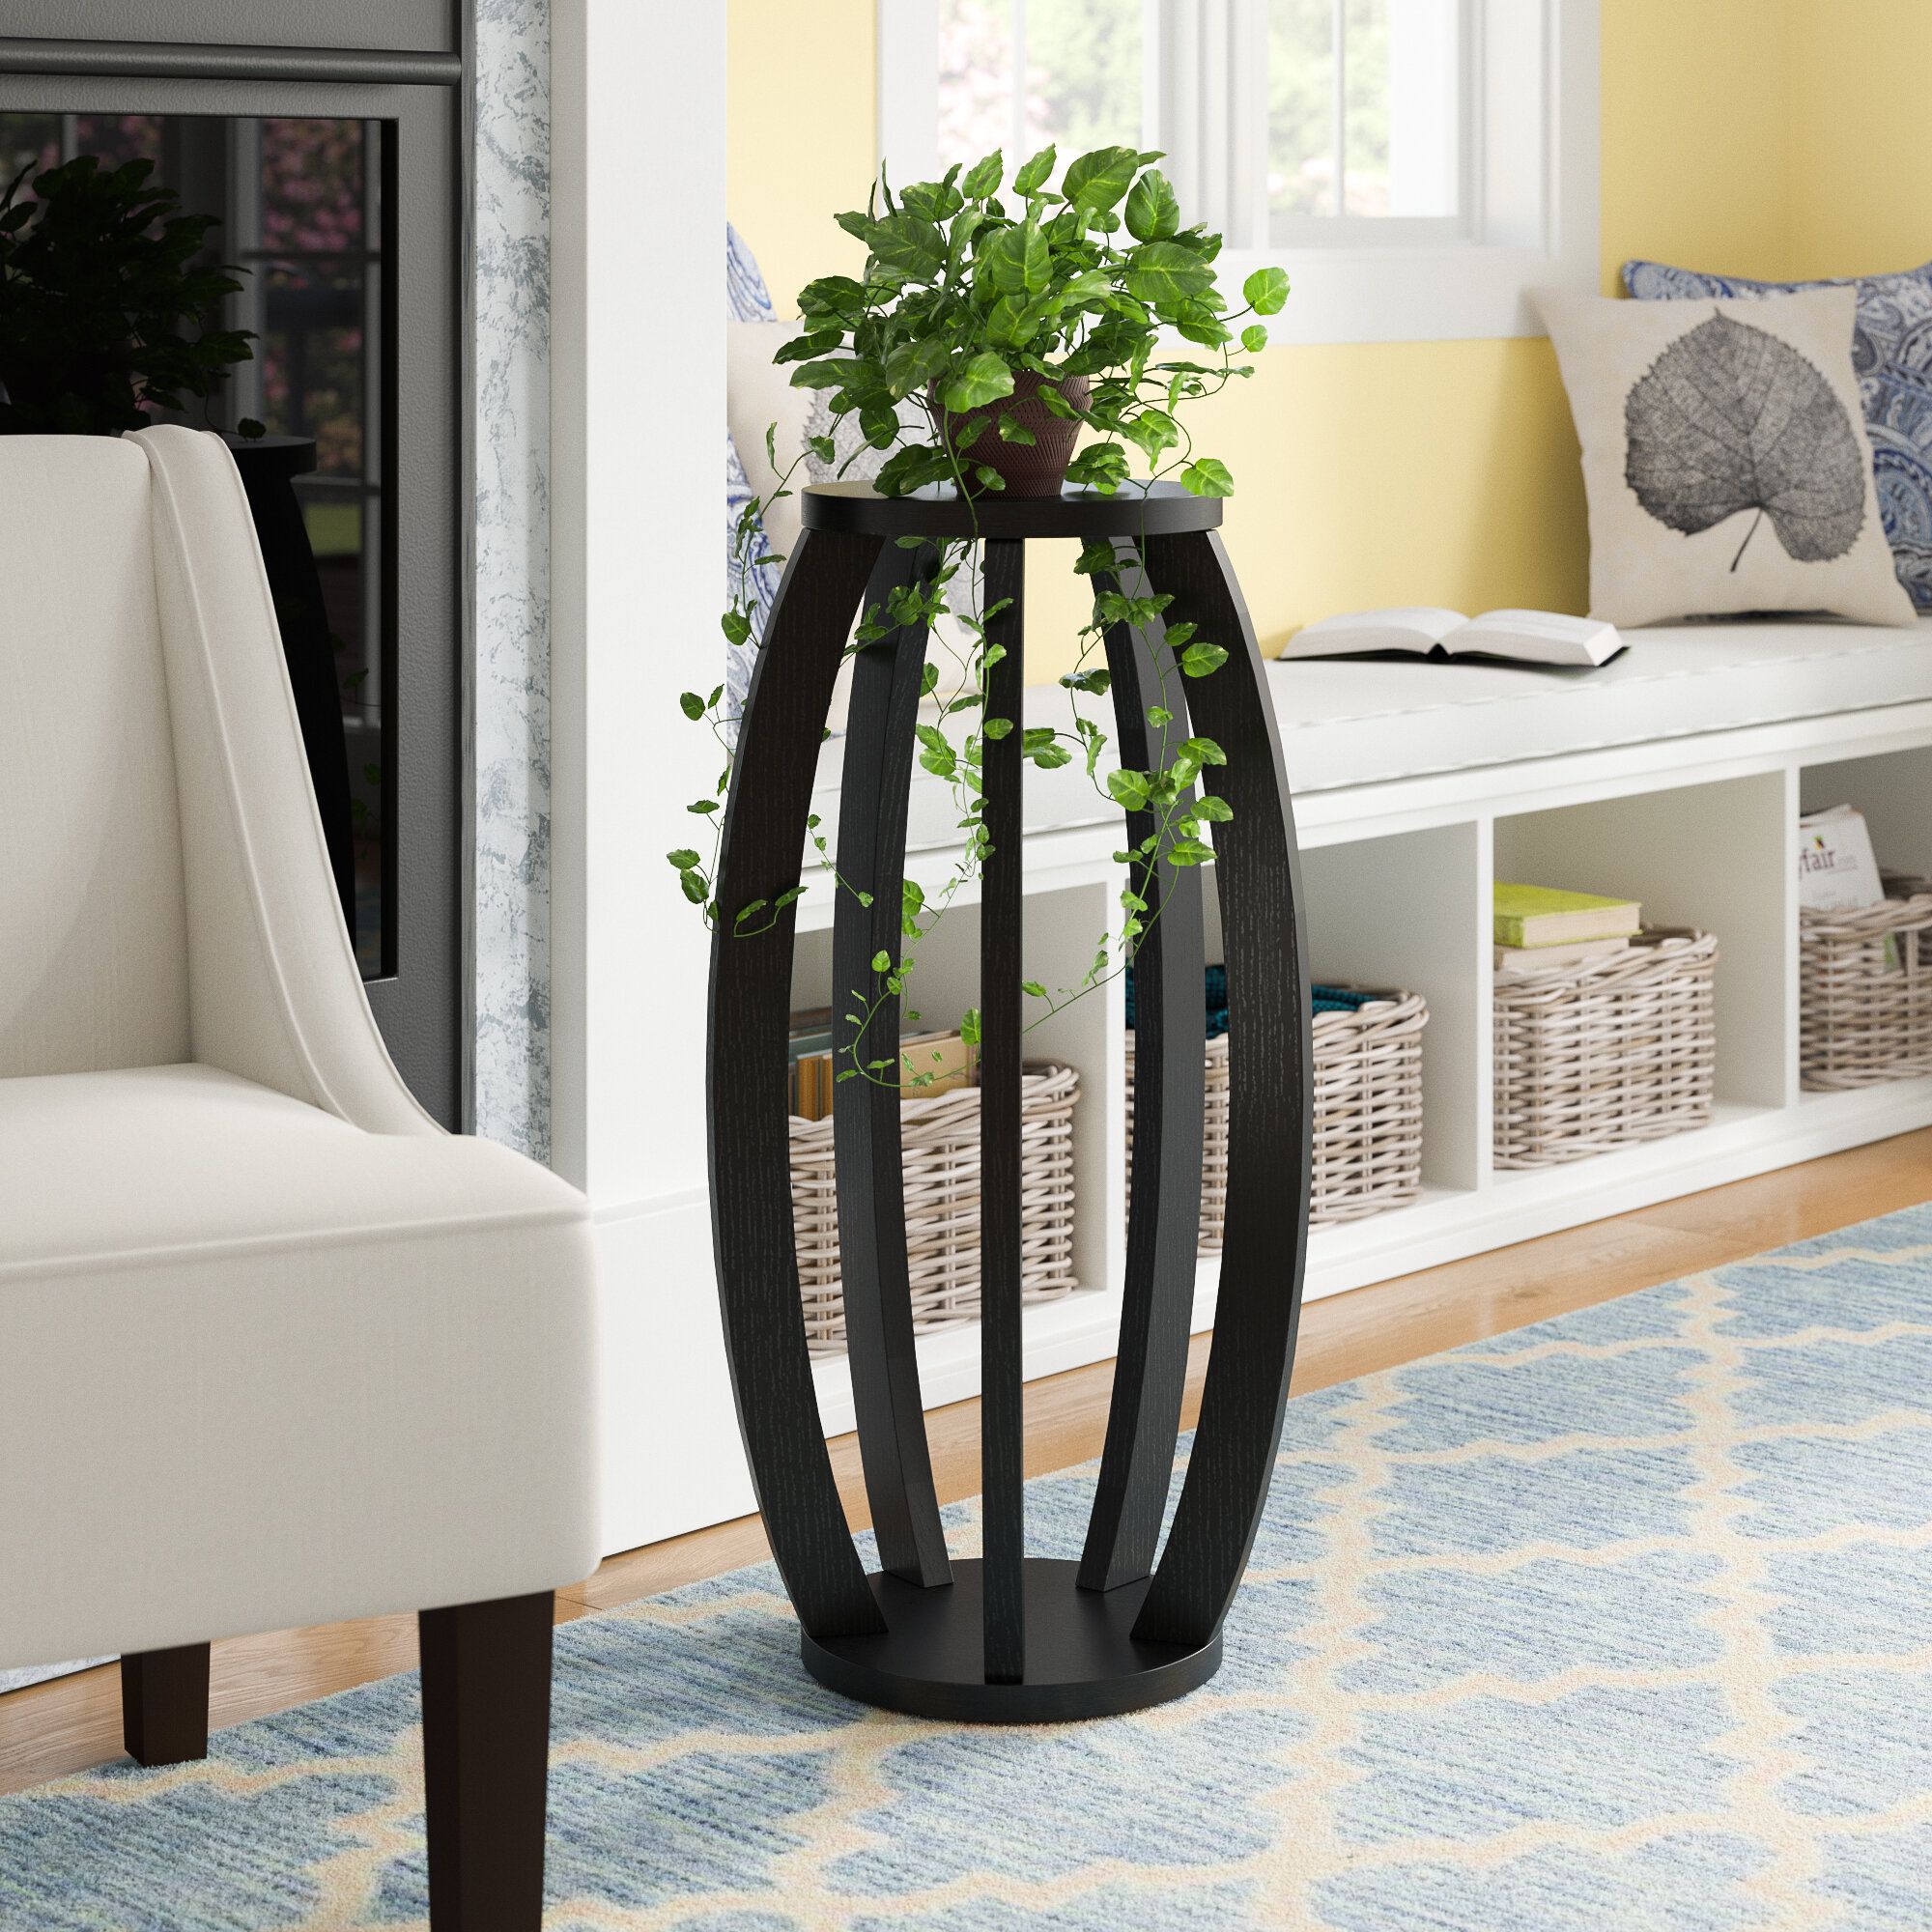 Rosalind Wheeler Round Pedestal Plant Stand & Reviews | Wayfair.co.uk With Regard To Pedestal Plant Stands (Photo 10 of 15)